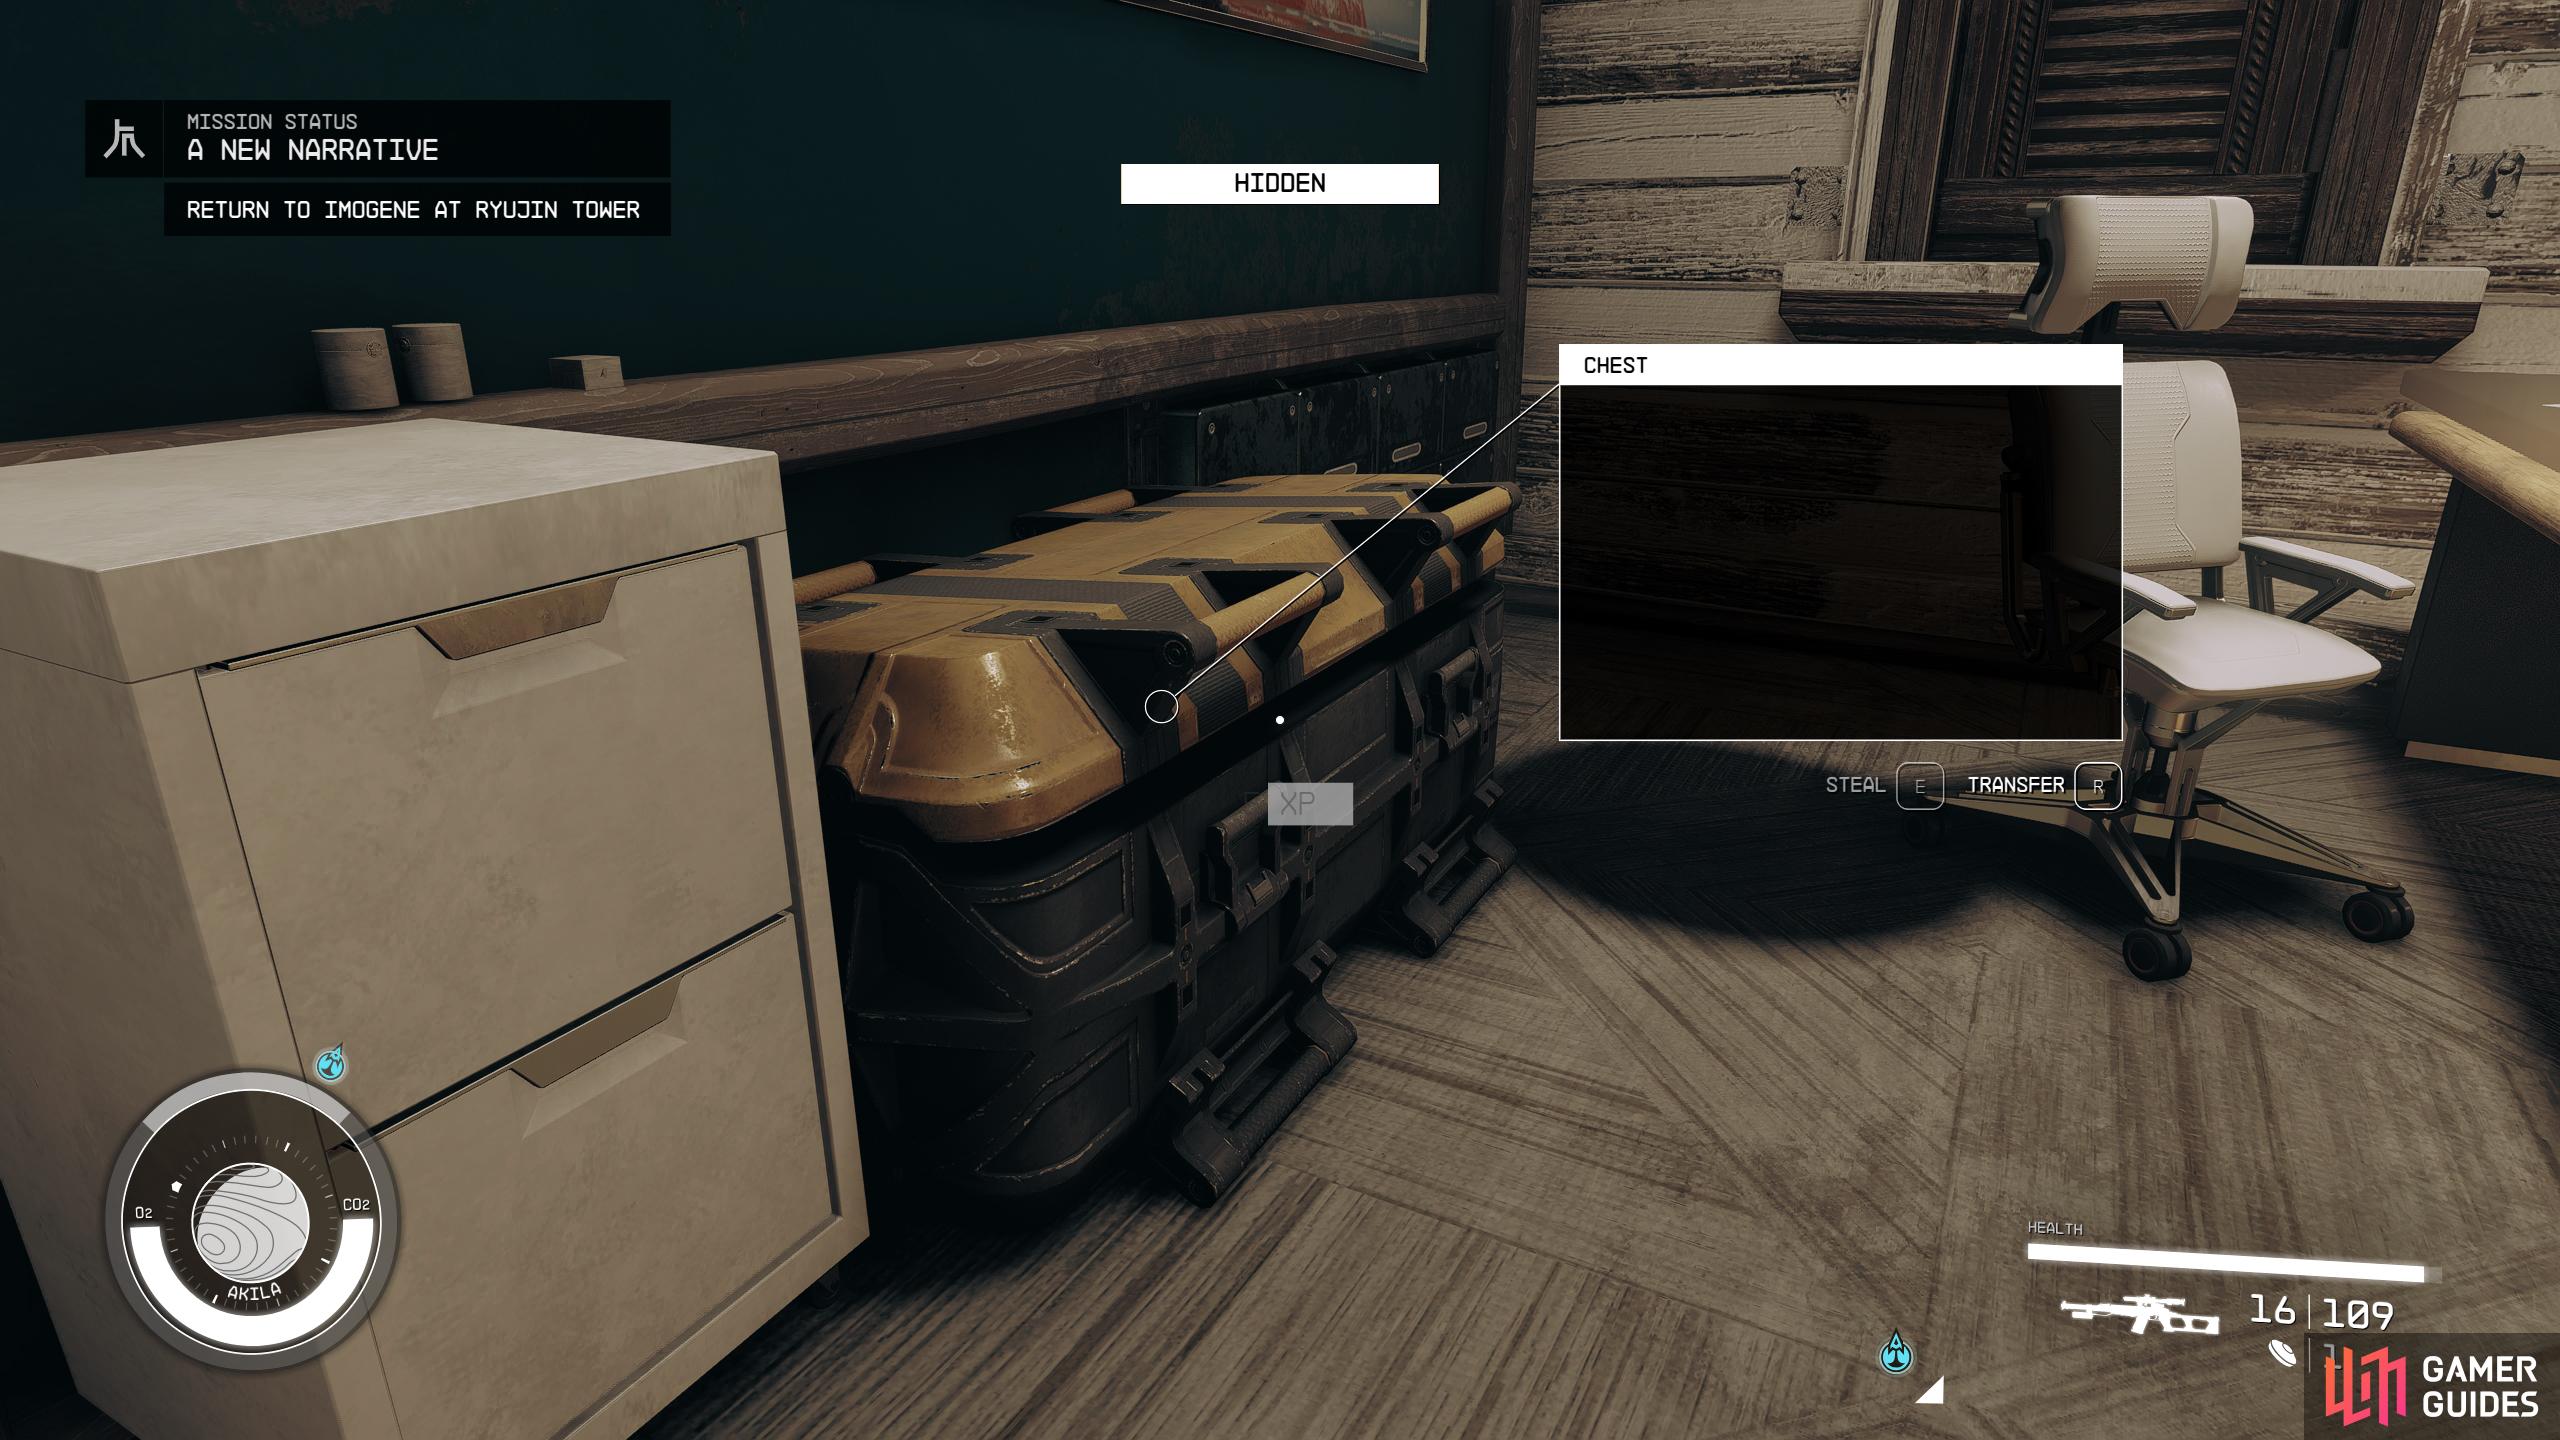 In the office, pick the locks on the chest, and place the confidential files in it from your inventory.